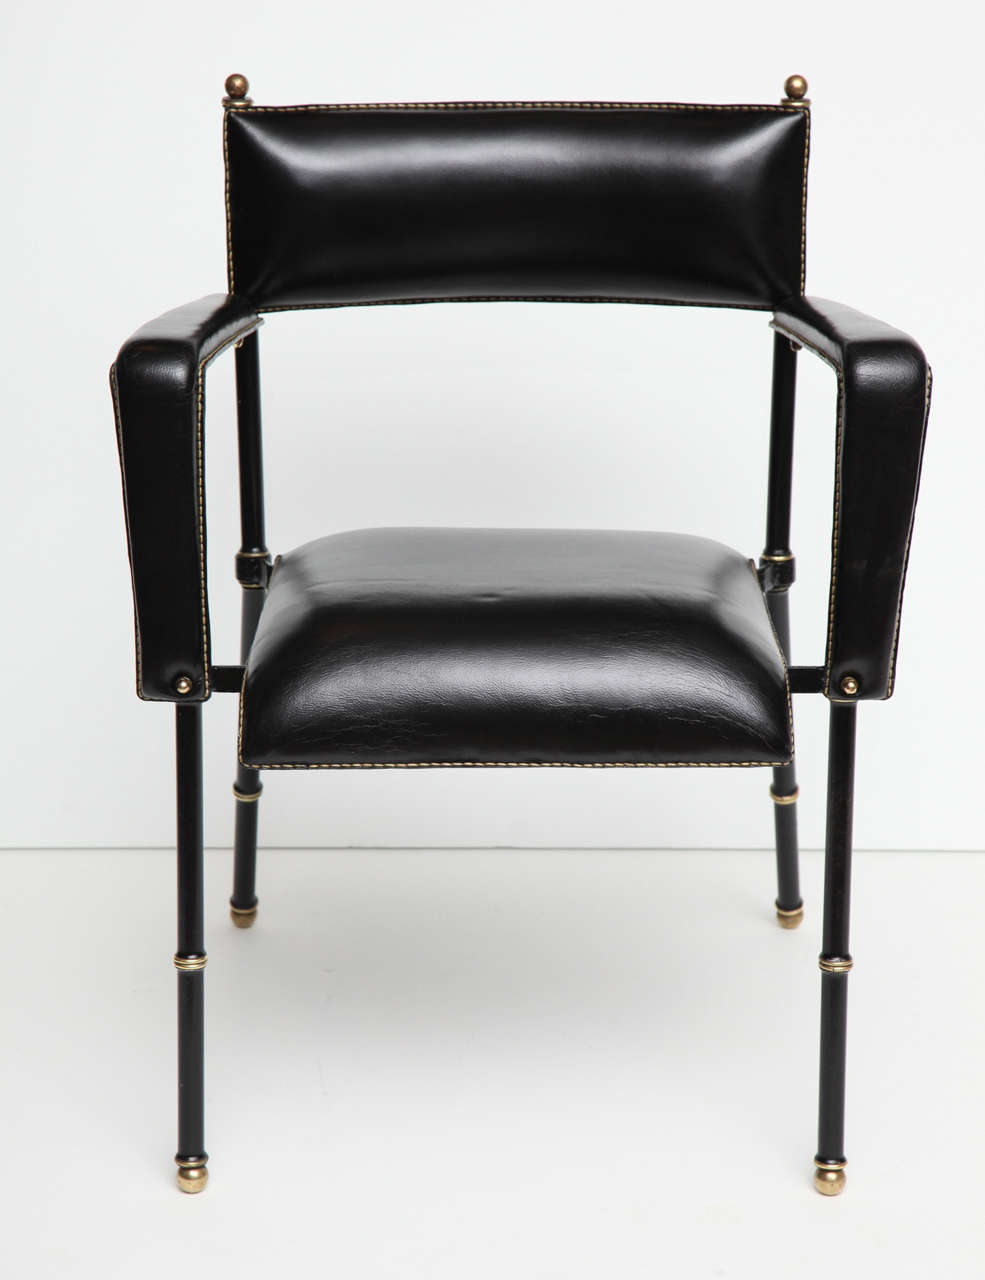 Set of four black leather armchairs by Jacques Adnet

* Can also be purchased individually